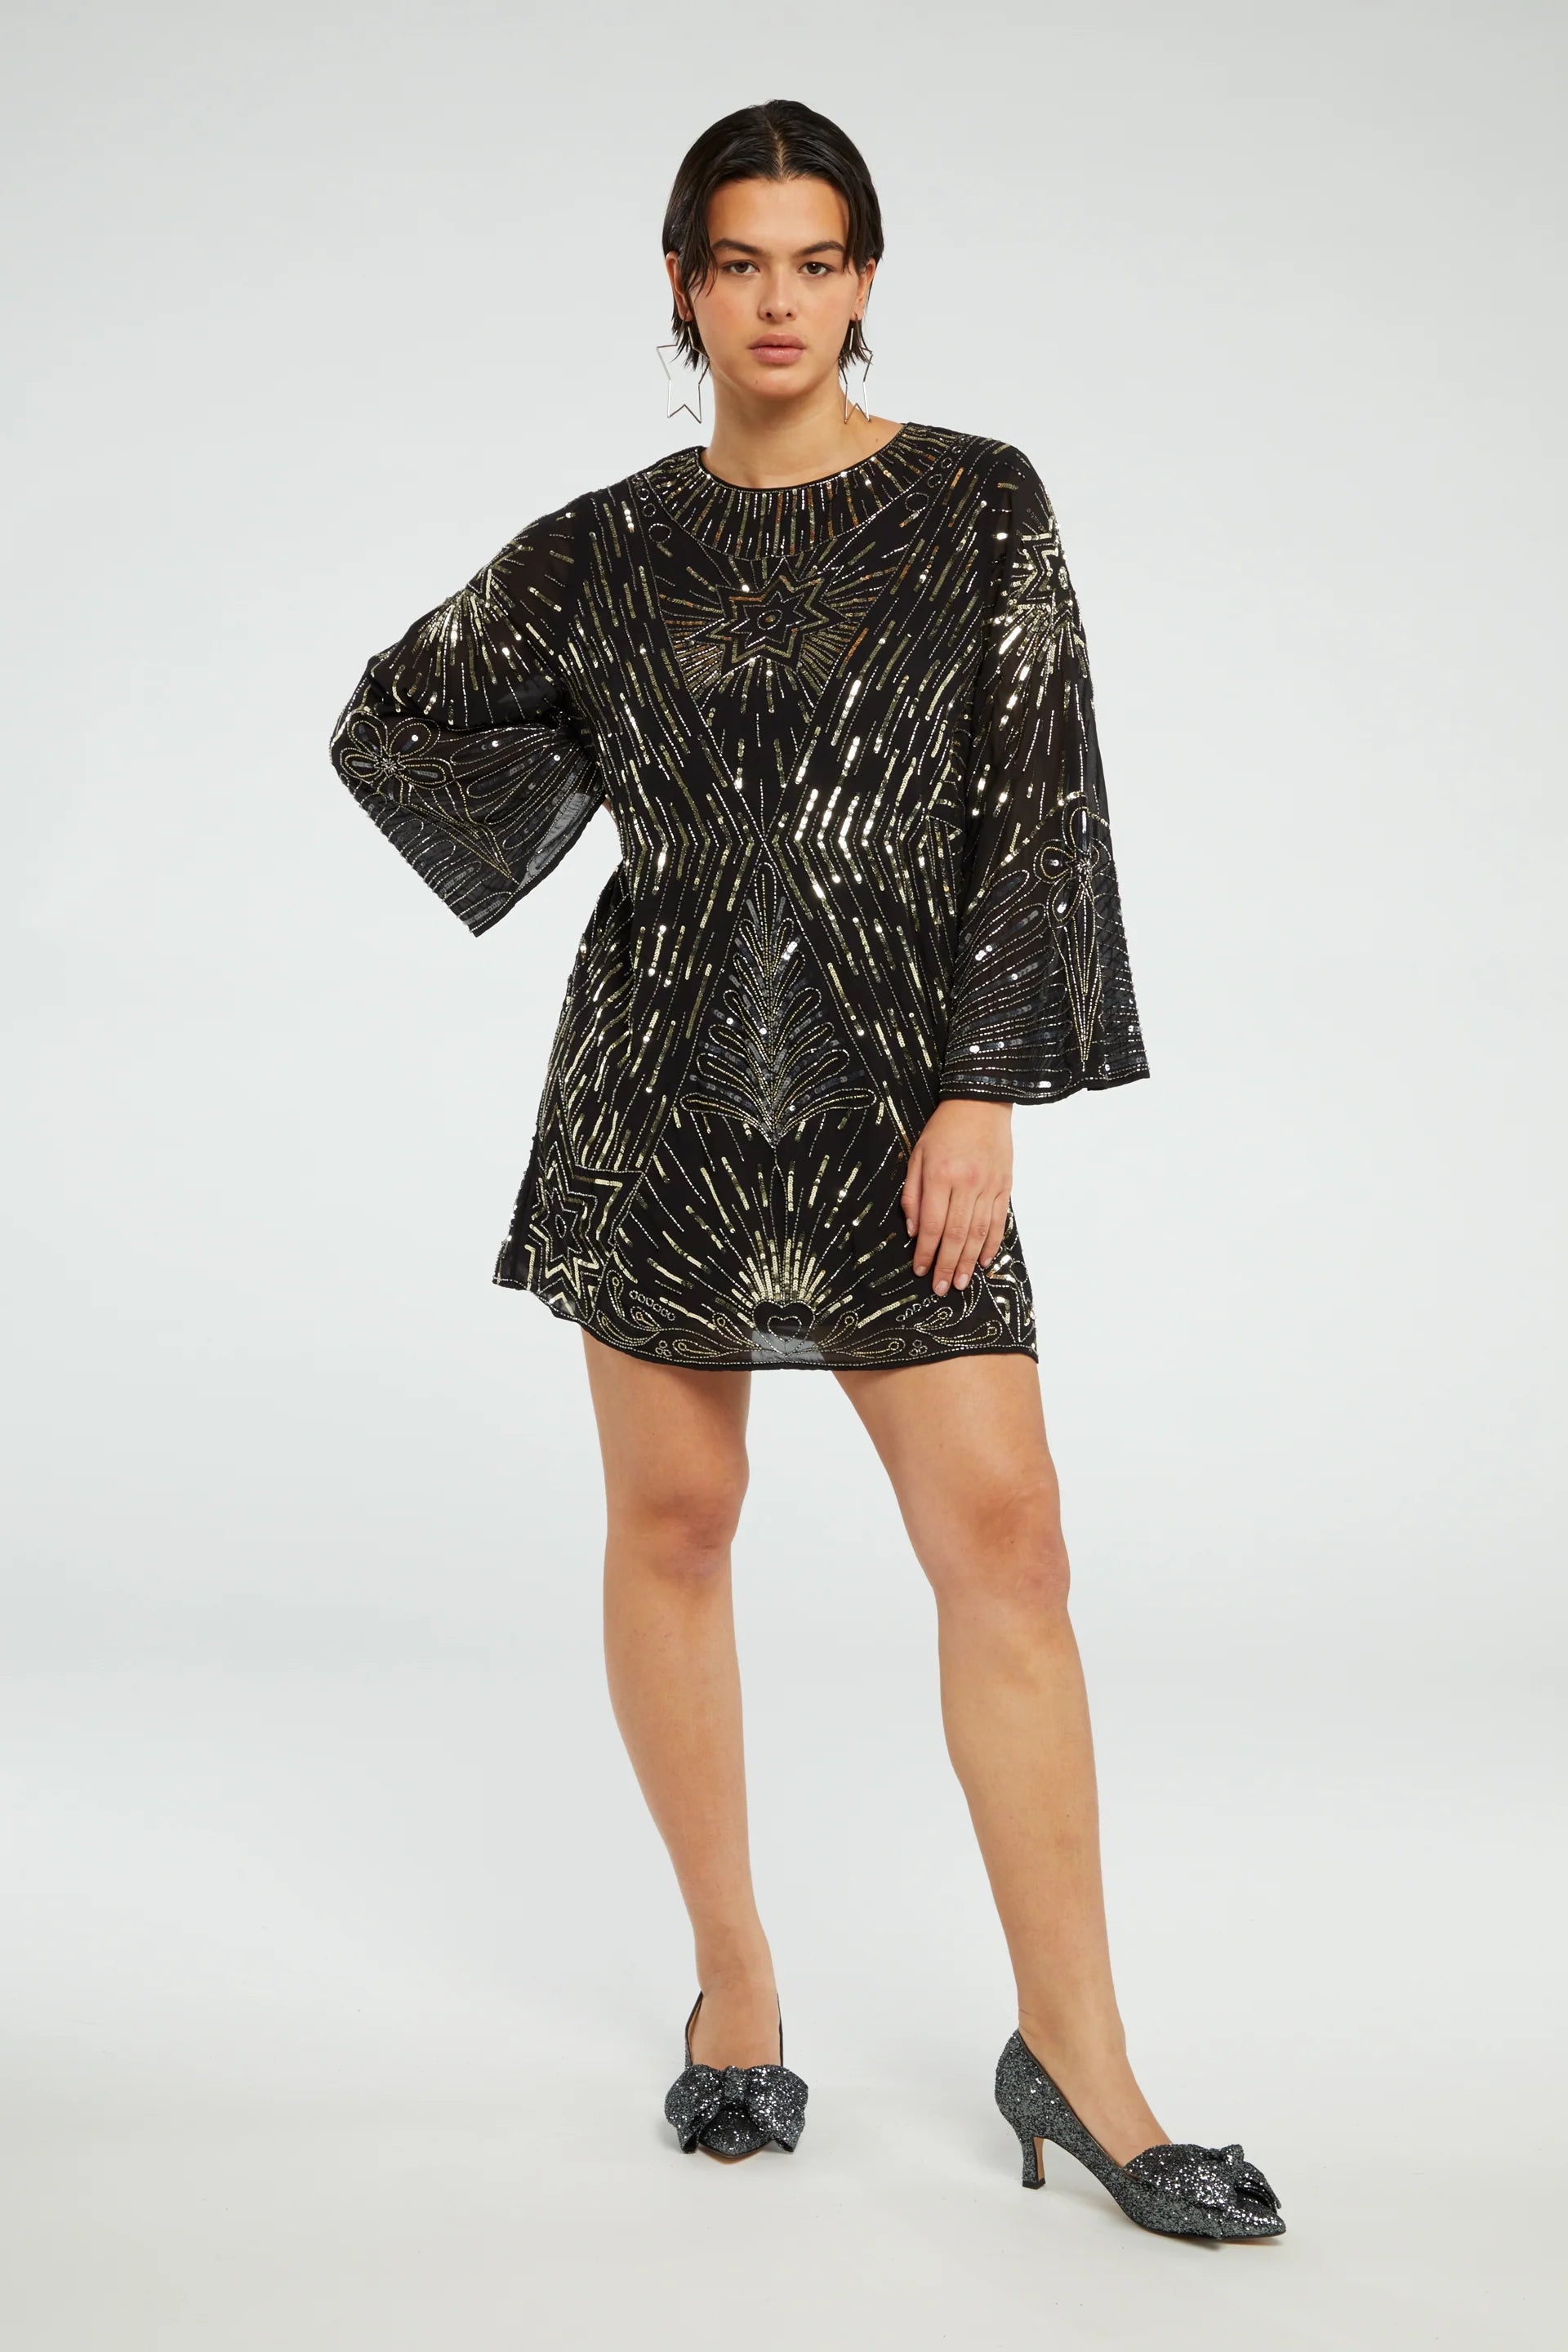 The model is wearing a Zali Dress - Black by Fabienne Chapot with gold sequin details.